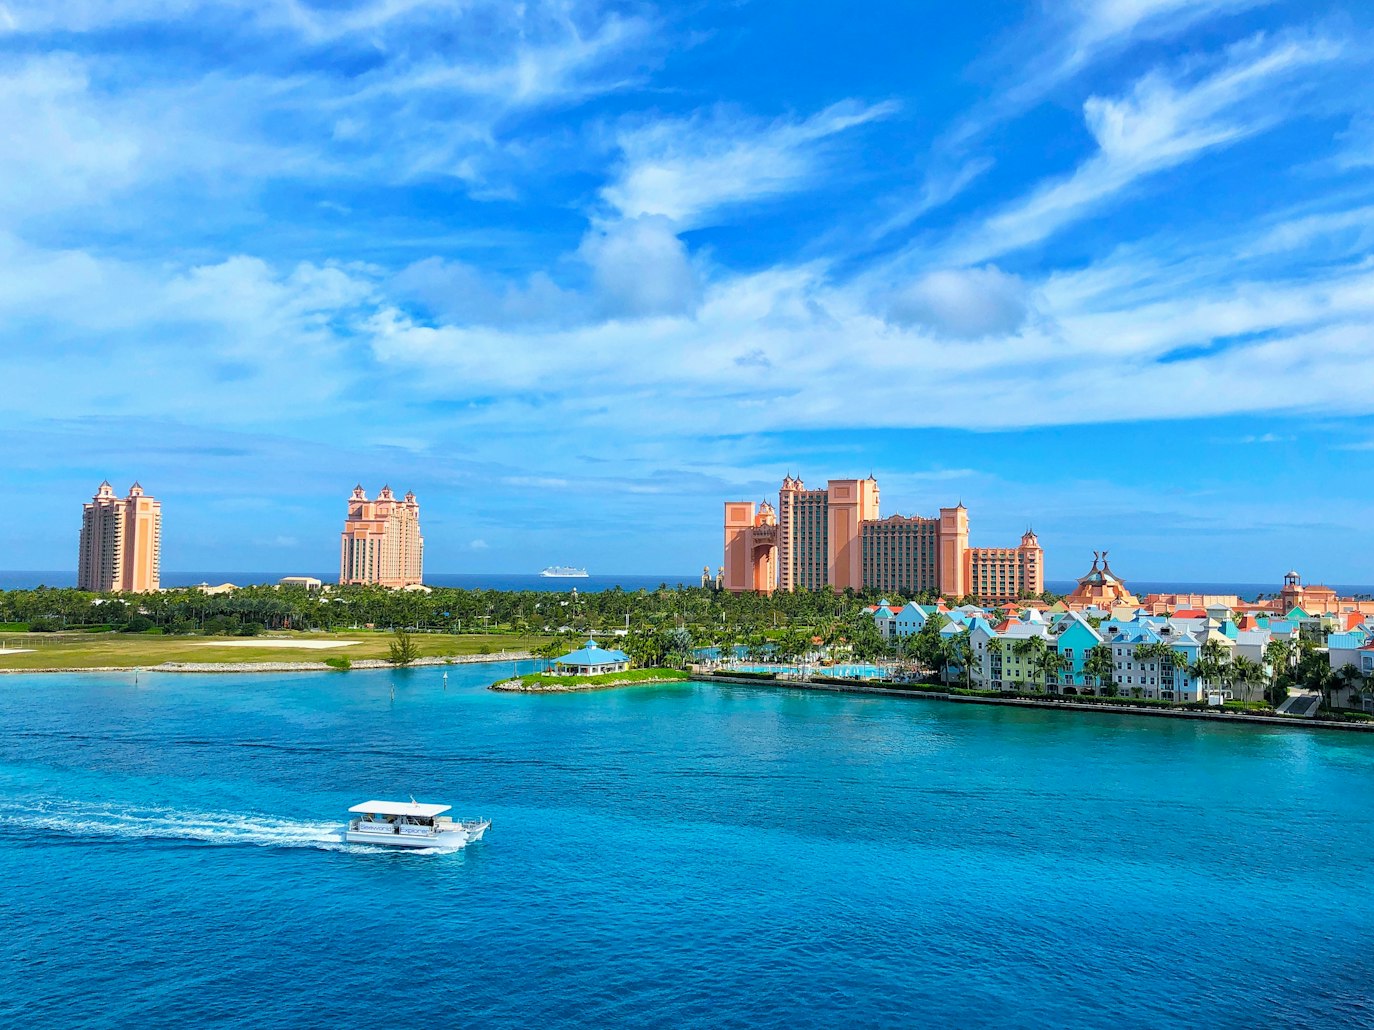 Bahamas Travel Guide - Attractions, What to See, Do, Costs, FAQs